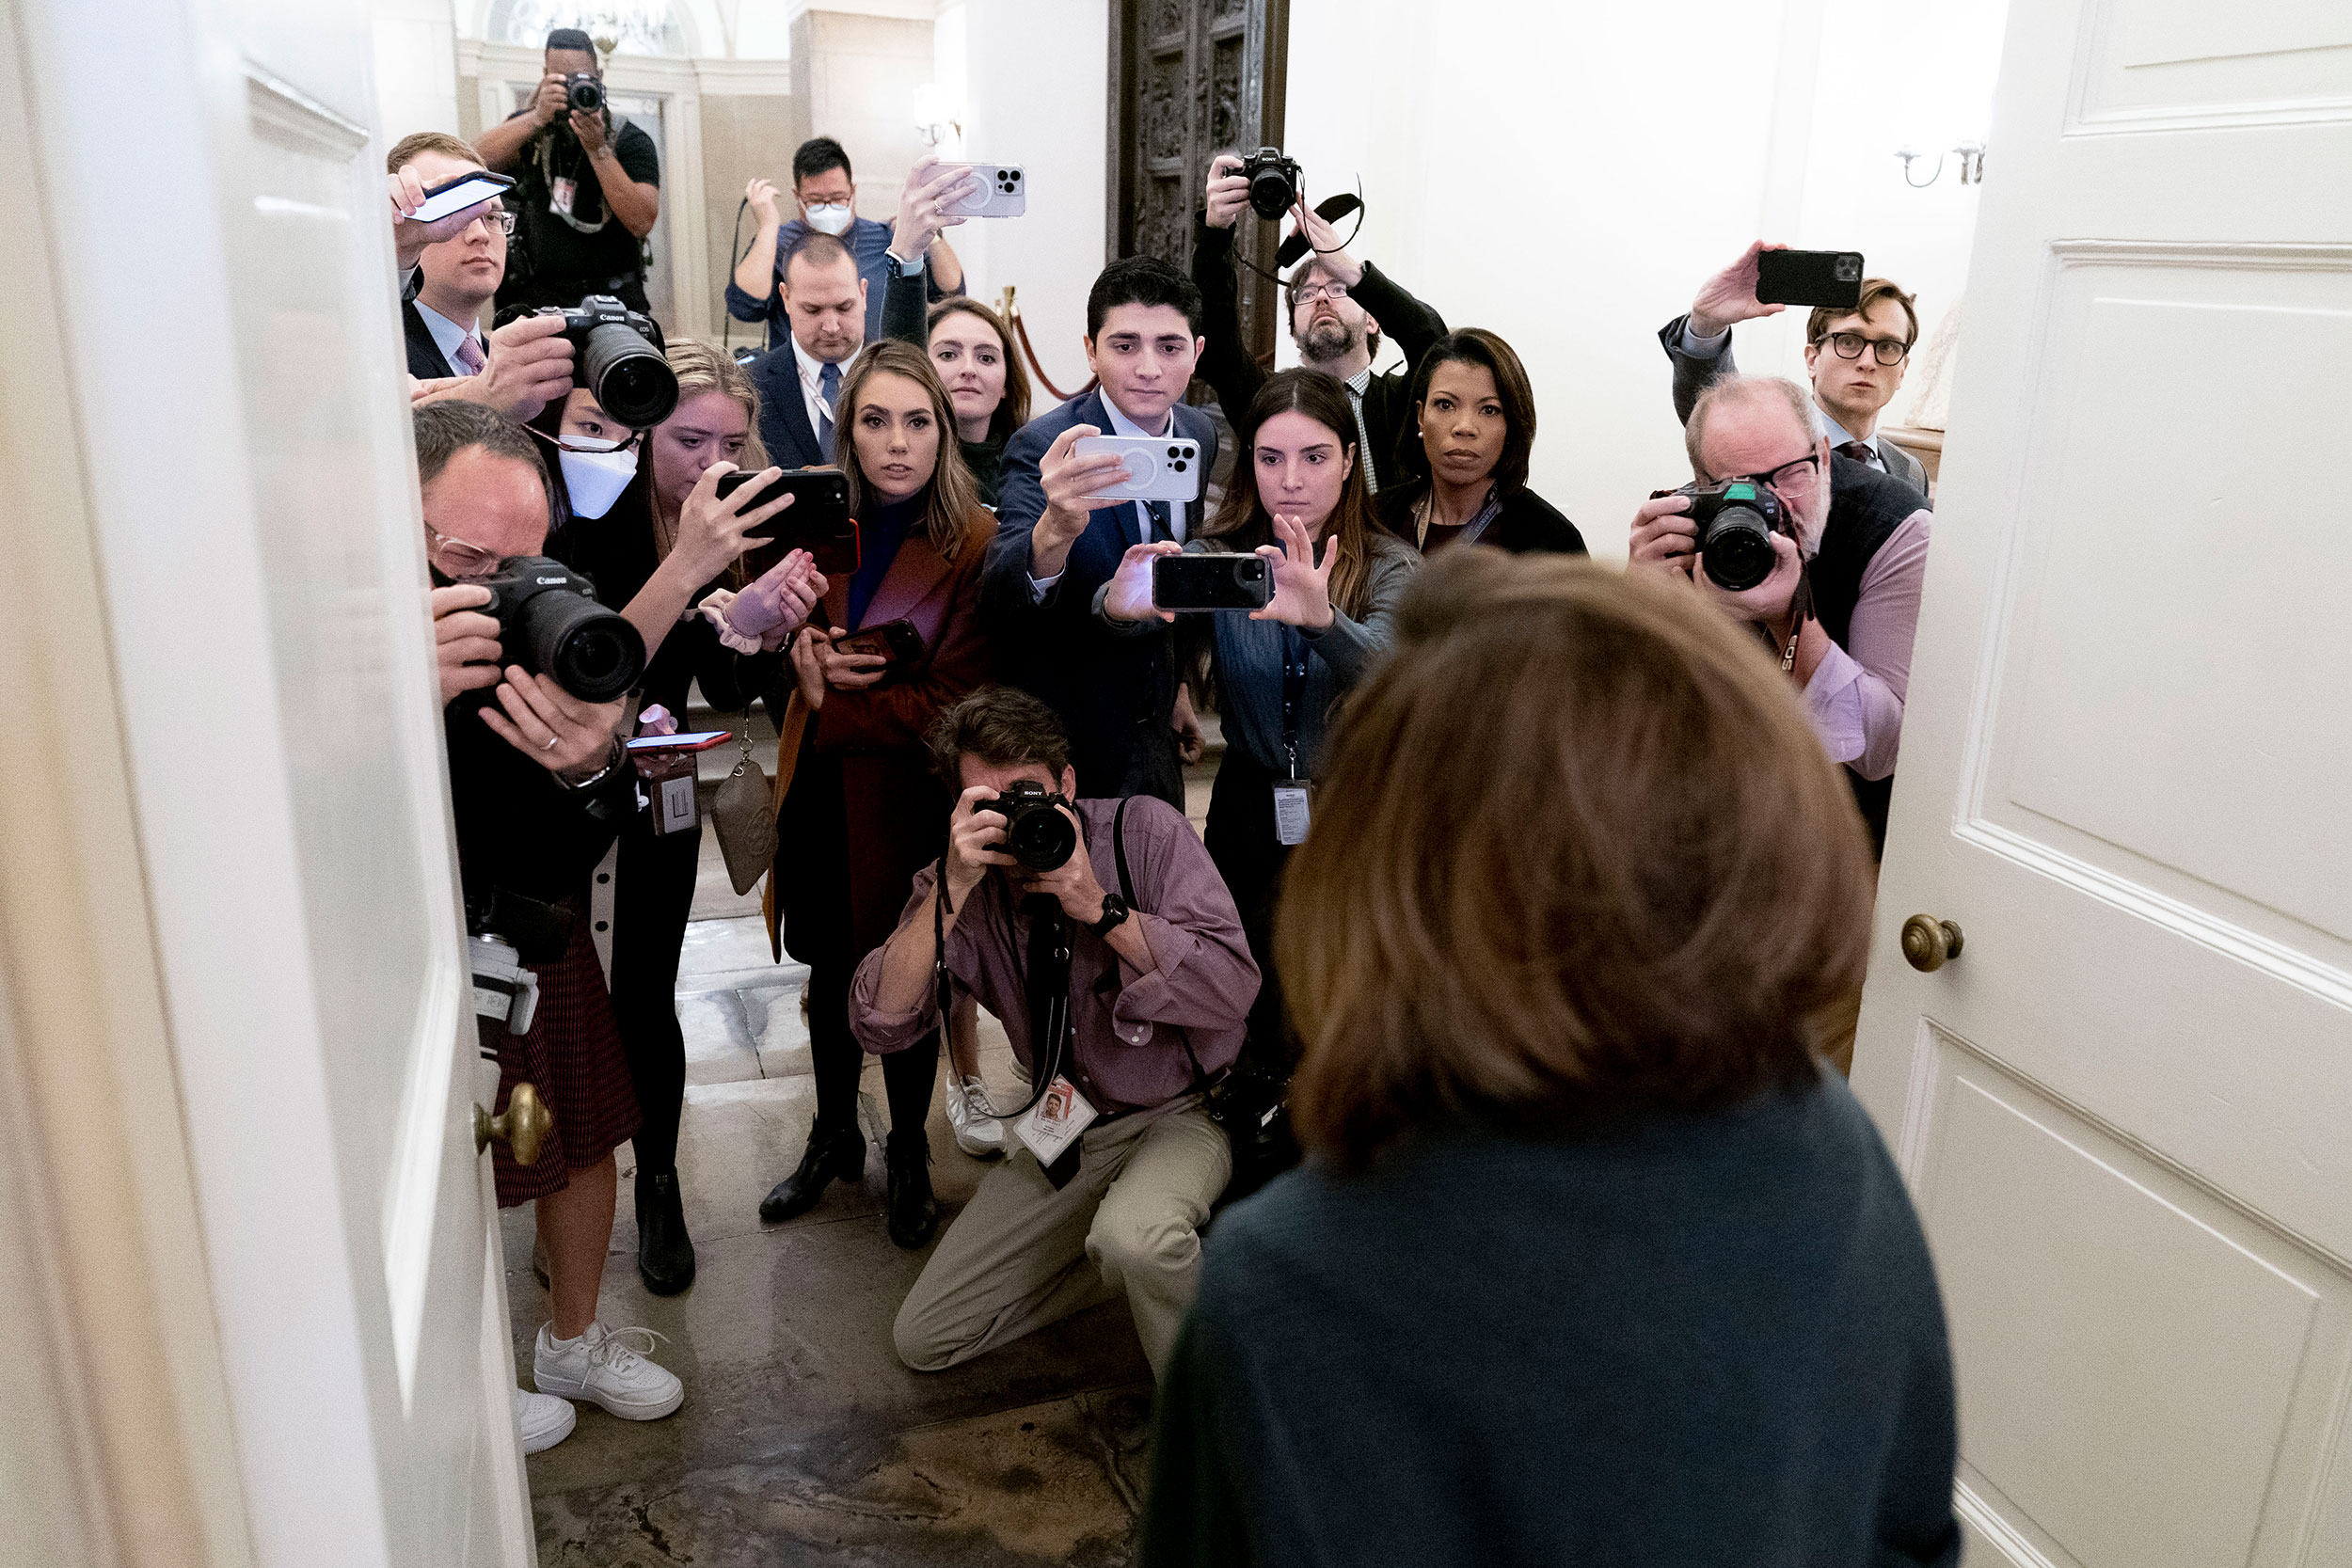 Former House Speaker Nancy Pelosi, seen in the foreground, talks to reporters as she arrives at the Capitol on Wednesday.